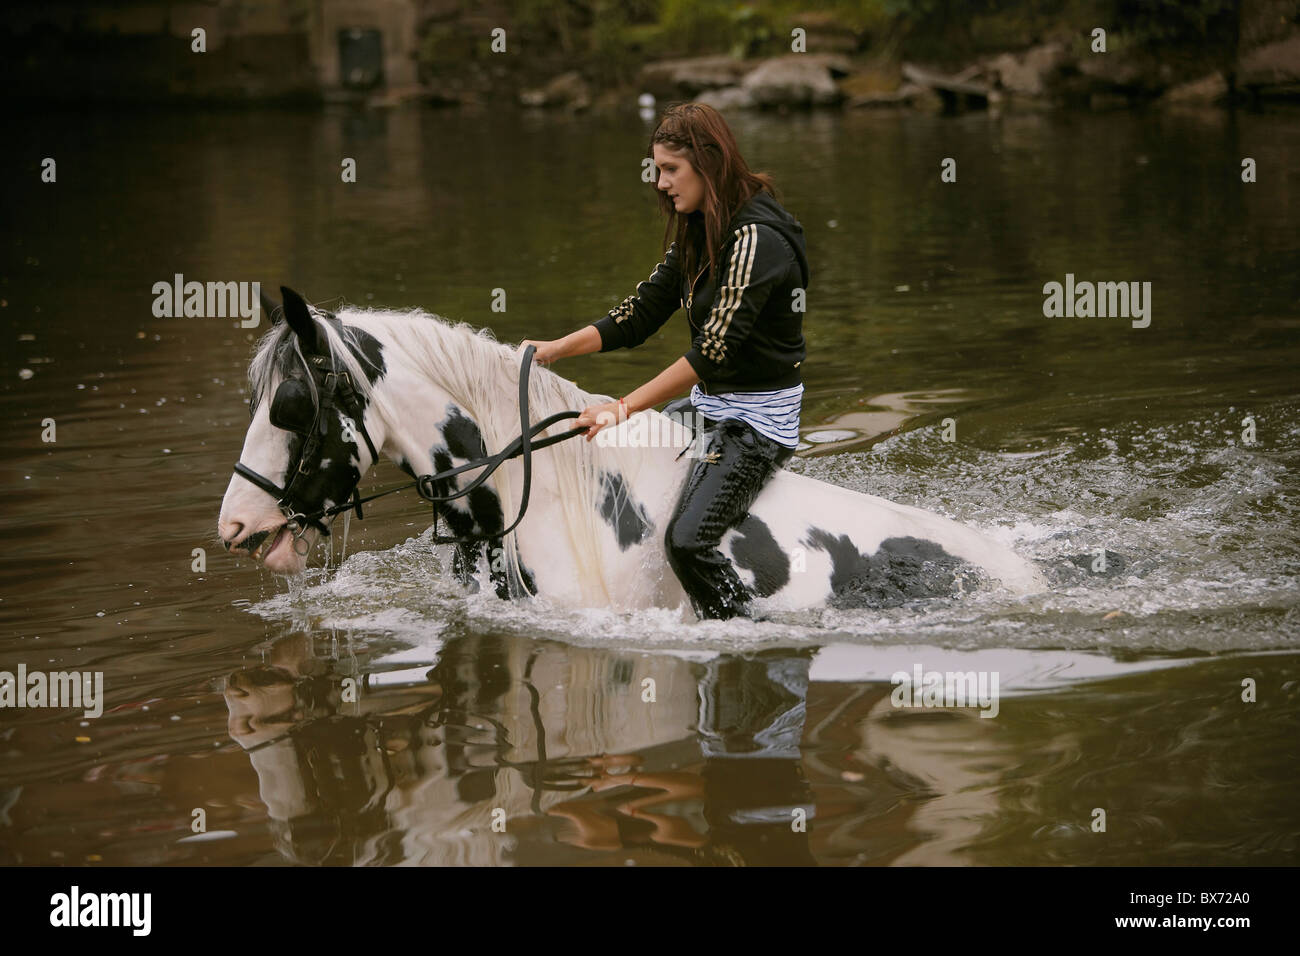 Gypsy traveller riding and washing a horse in the river Eden during the Appleby Horse Fair, Appleby-in-Westmorland, Cumbria, UK Stock Photo